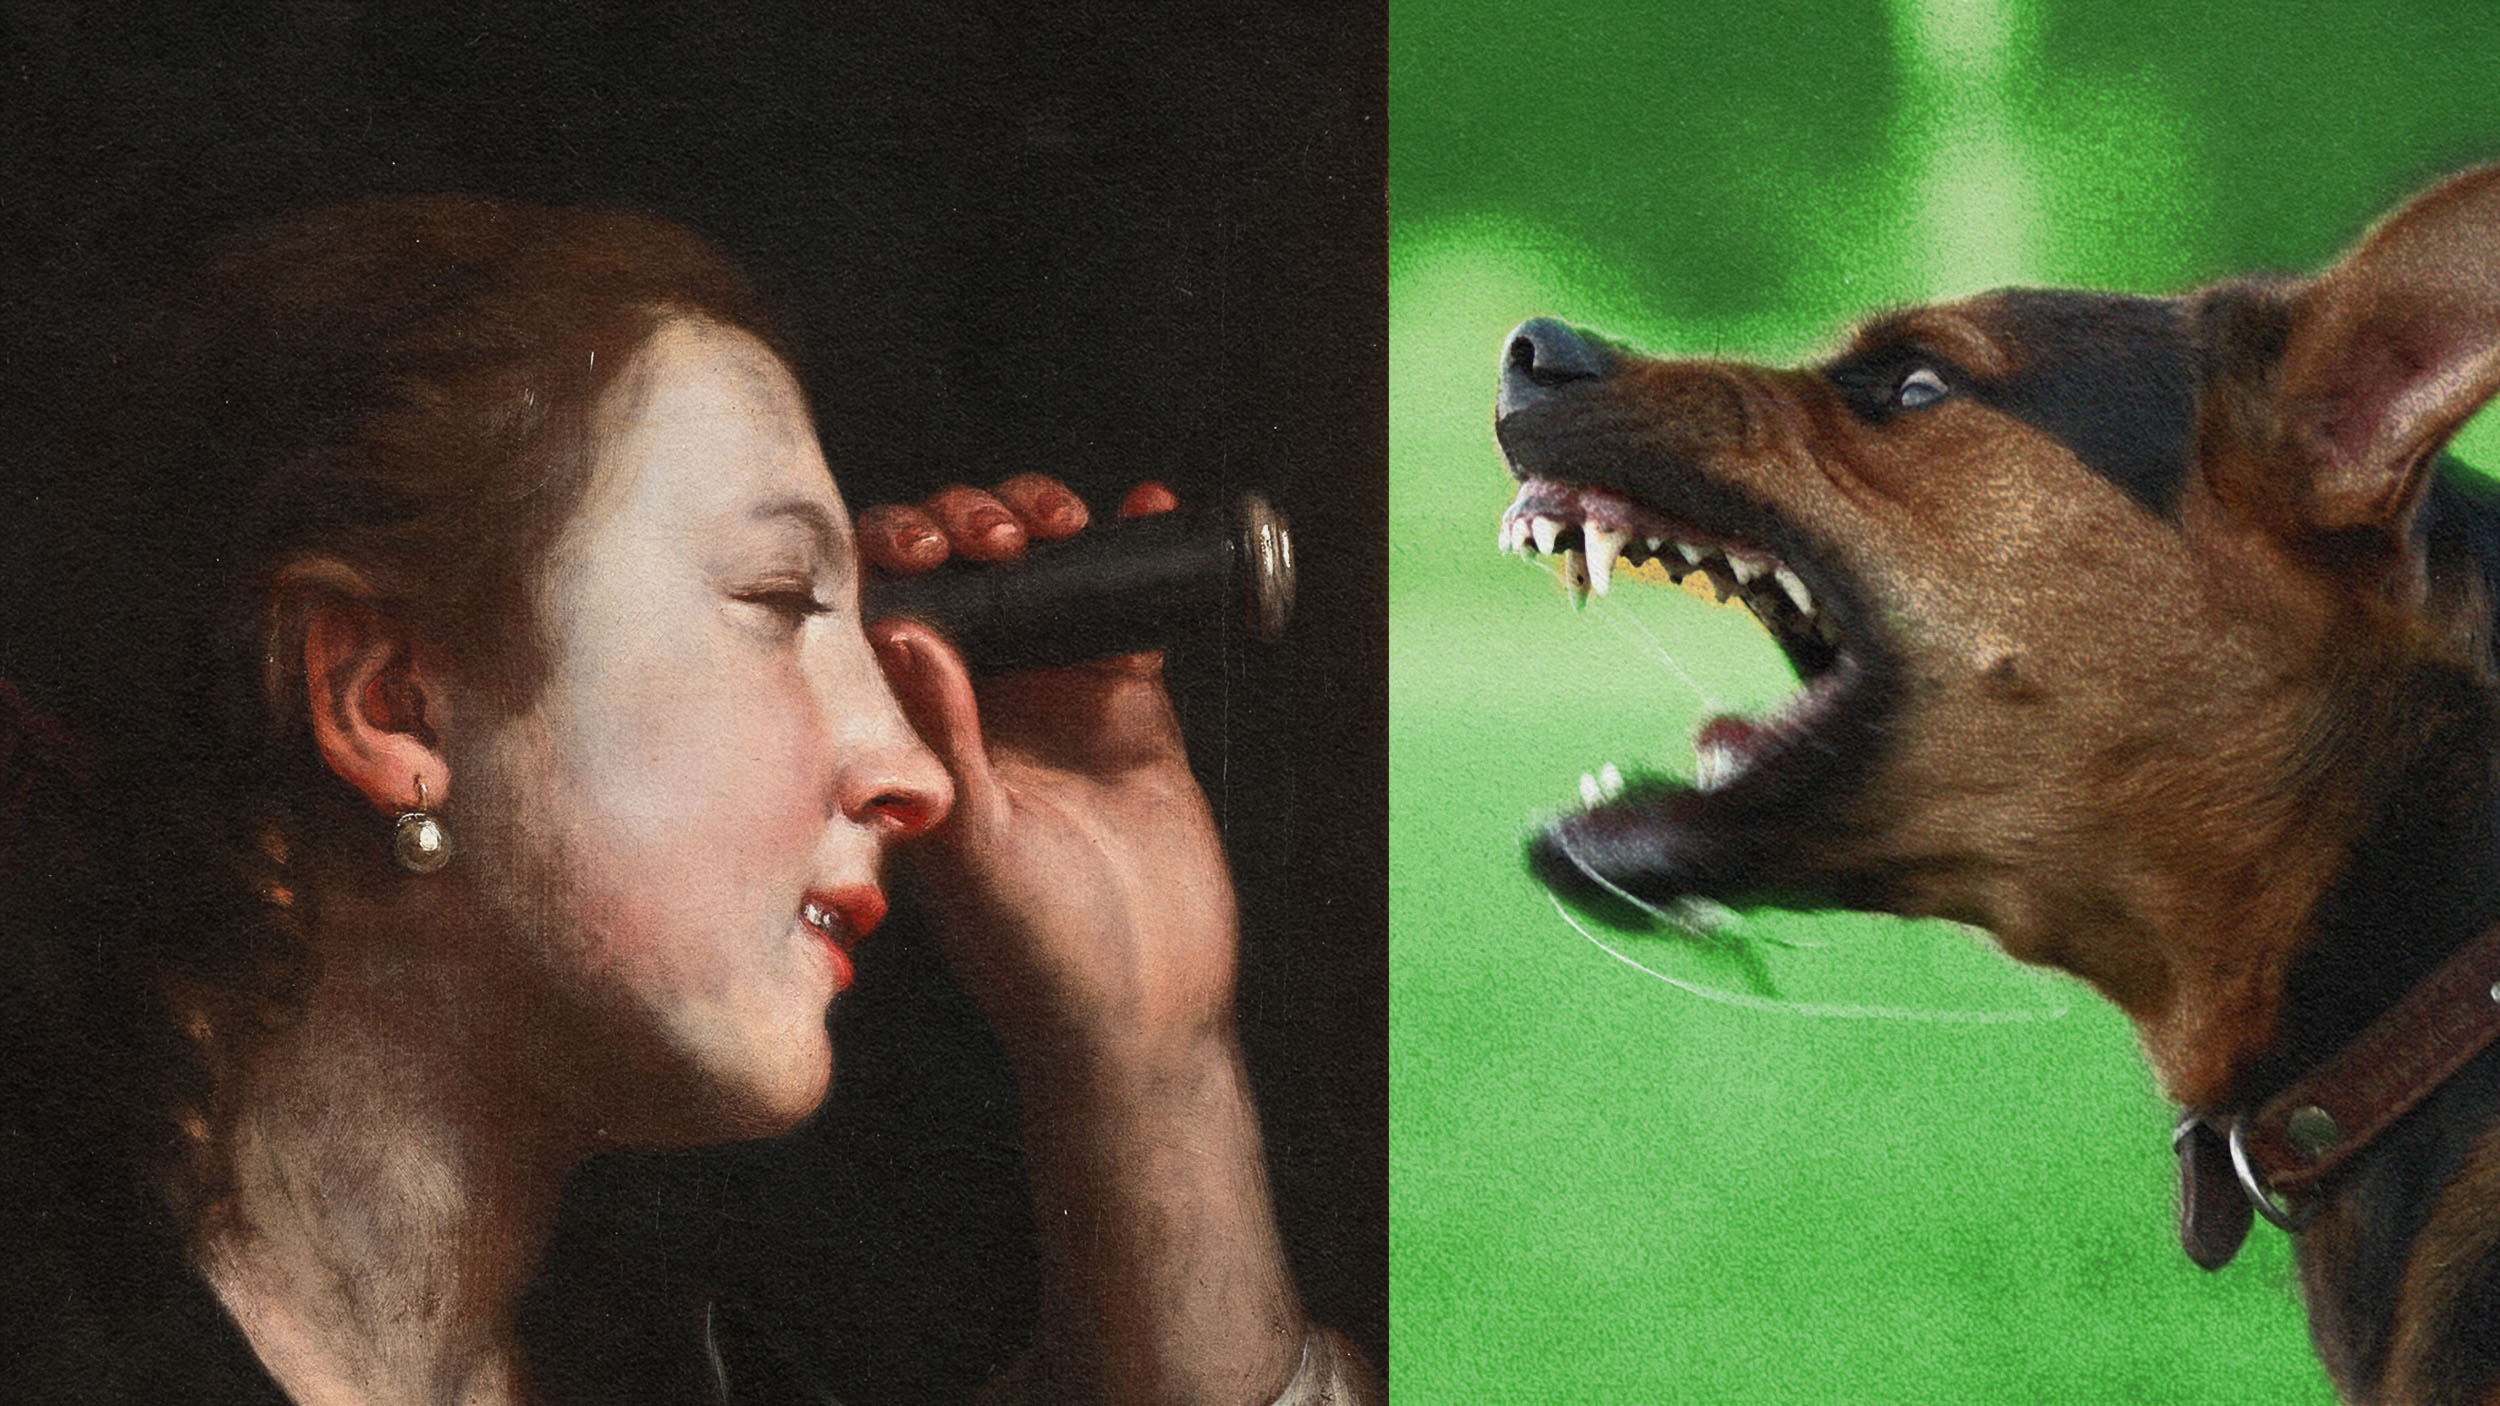 Split image. On the left, a woman using a spyglass, and on the right, fury depicted by an aggressive dog barking.